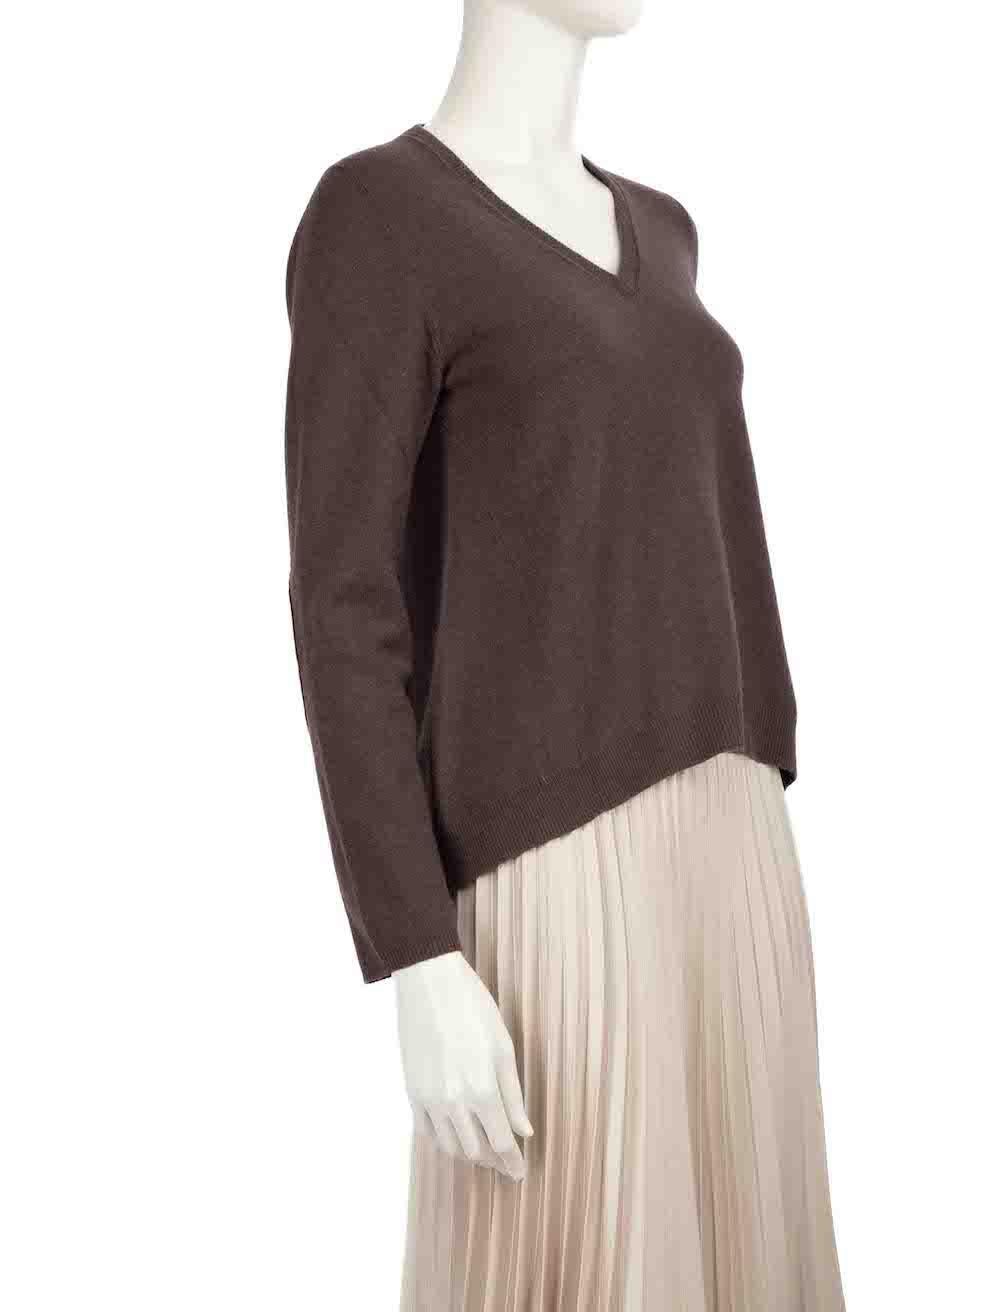 CONDITION is Never worn. No visible wear to jumper is evident on this new Brunello Cucinelli designer resale item.
 
 
 
 Details
 
 
 Brown
 
 Cashmere
 
 Knit jumper
 
 V-neck
 
 Long sleeves
 
 Brown suede elbow patches
 
 
 
 
 
 Made in Italy
